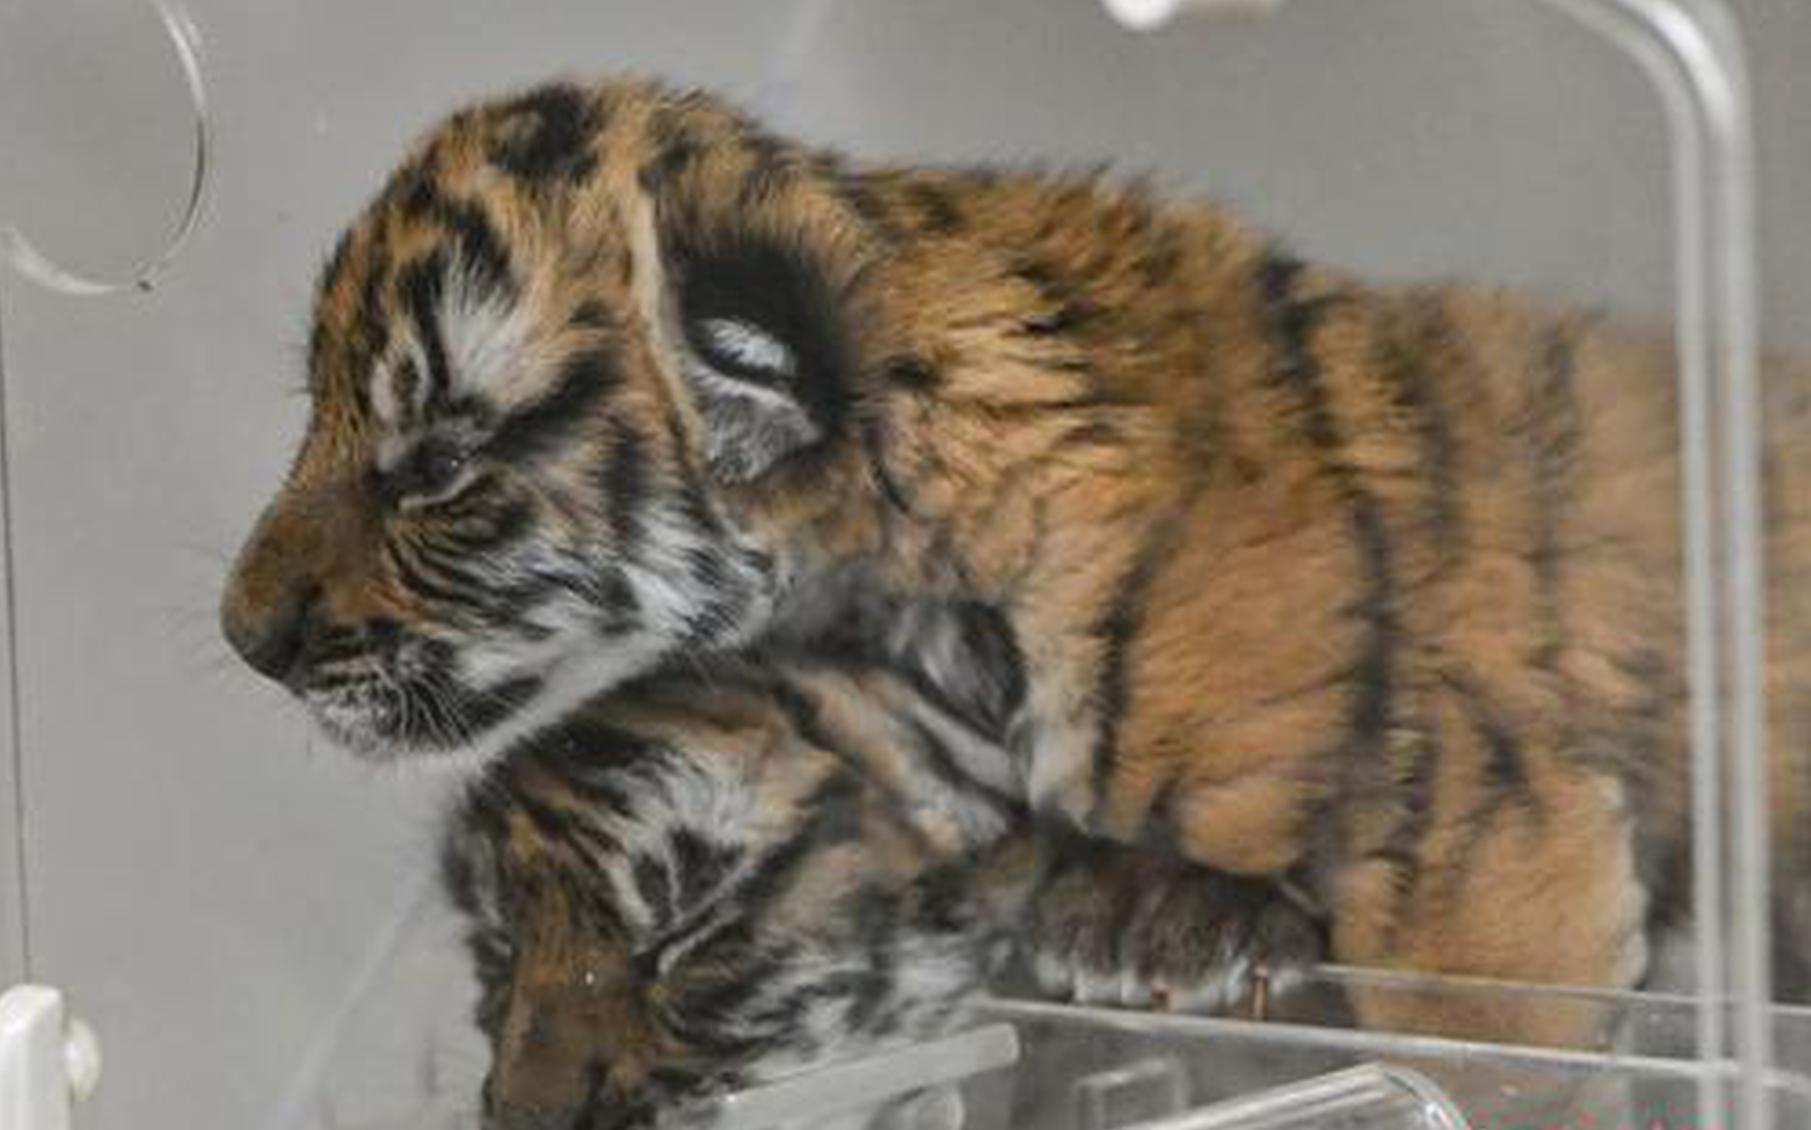 Two South China tiger cubs in good shape in China's Guangdong